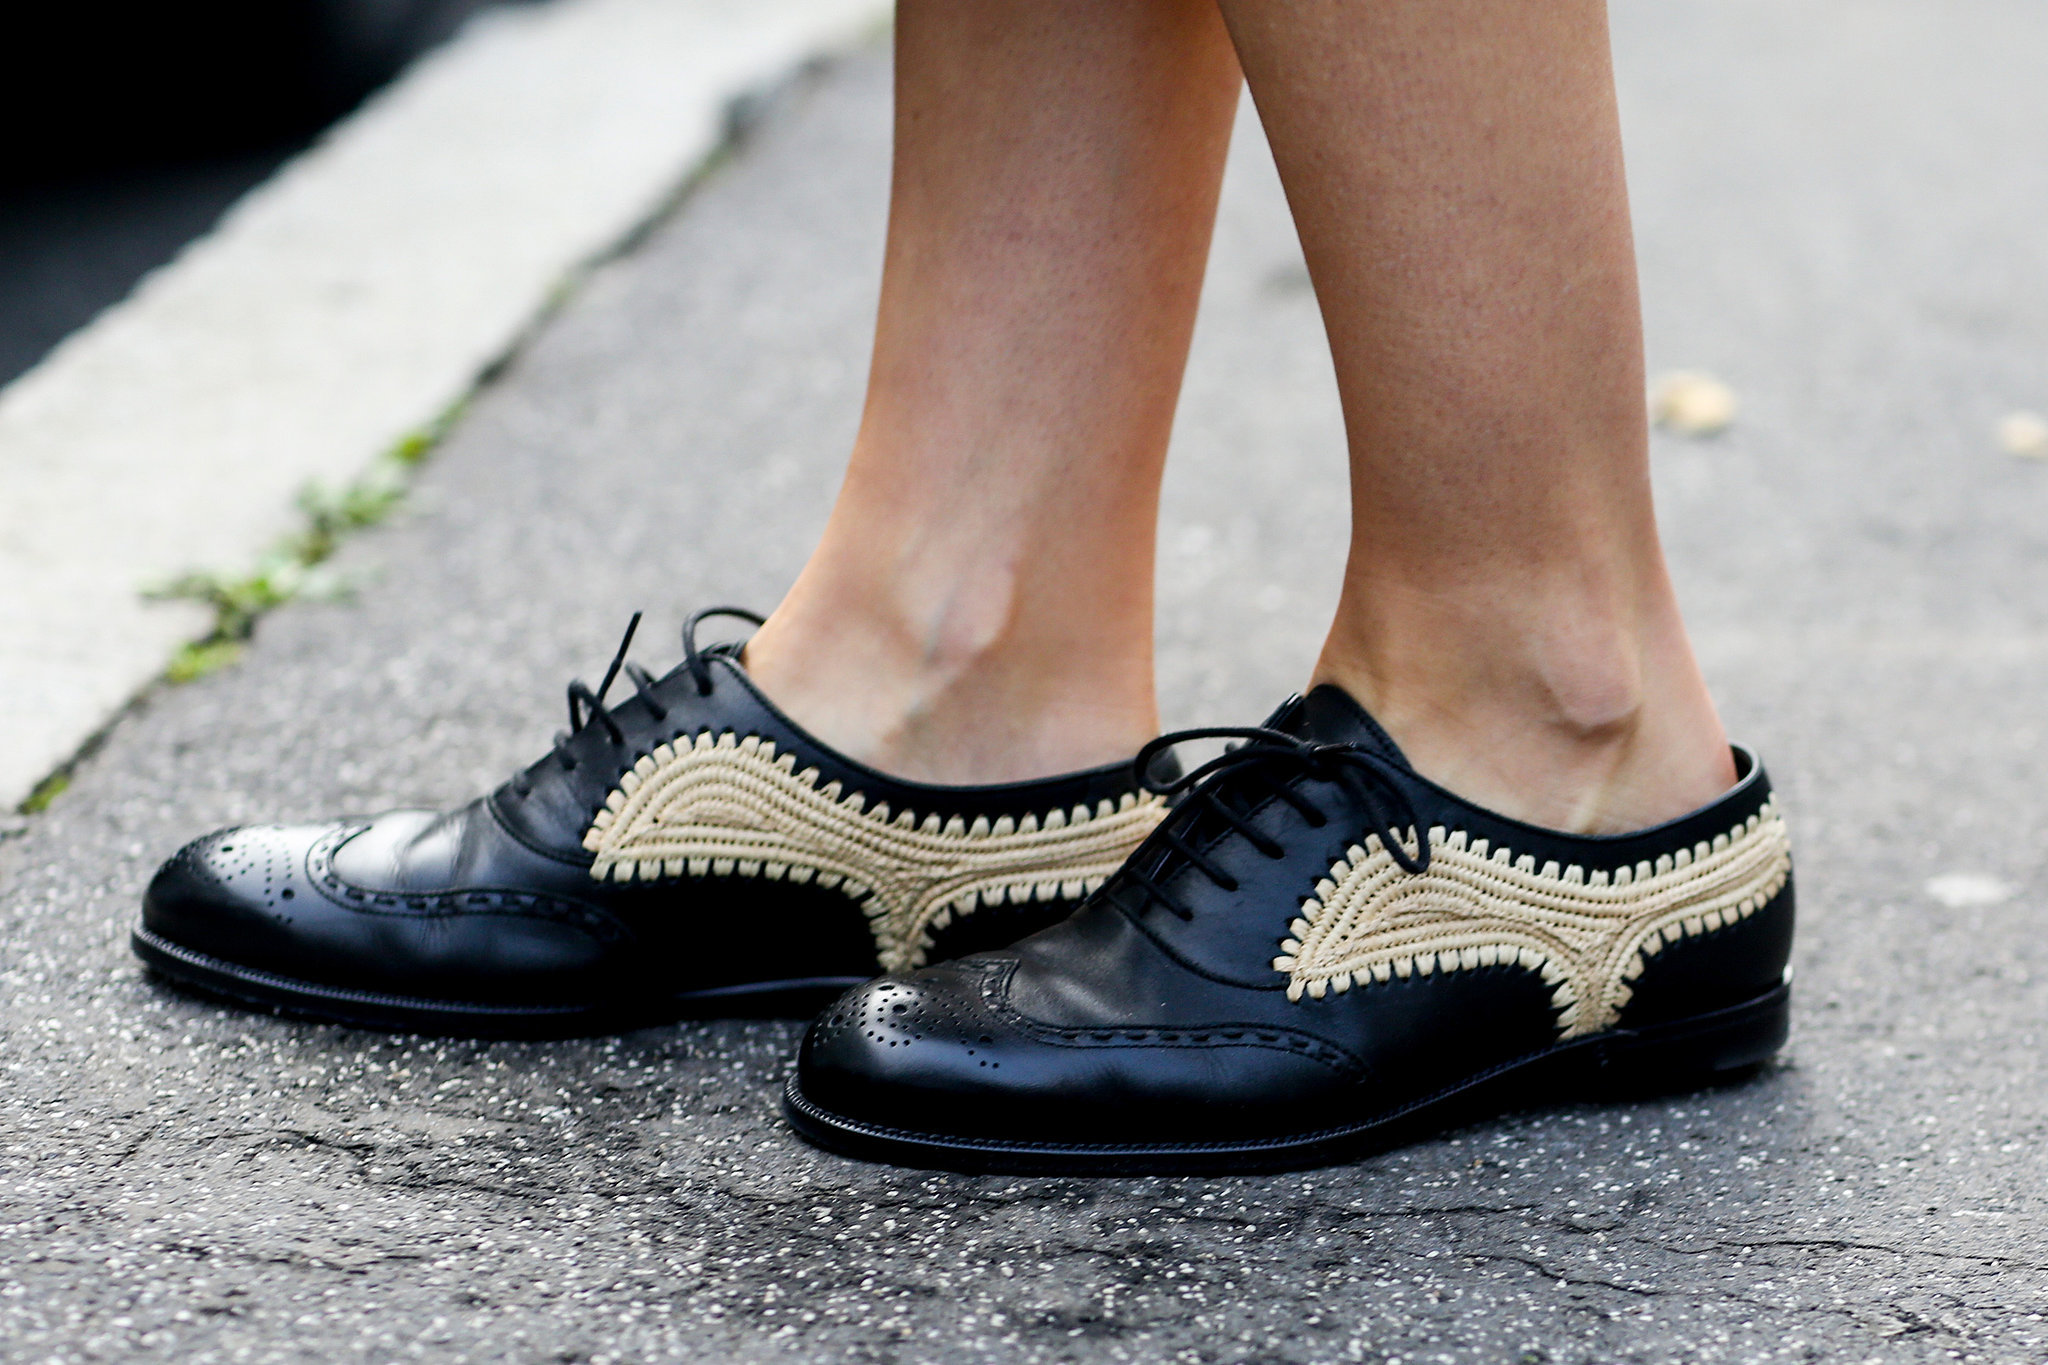 Does it get cooler than gold-braided brogues?
